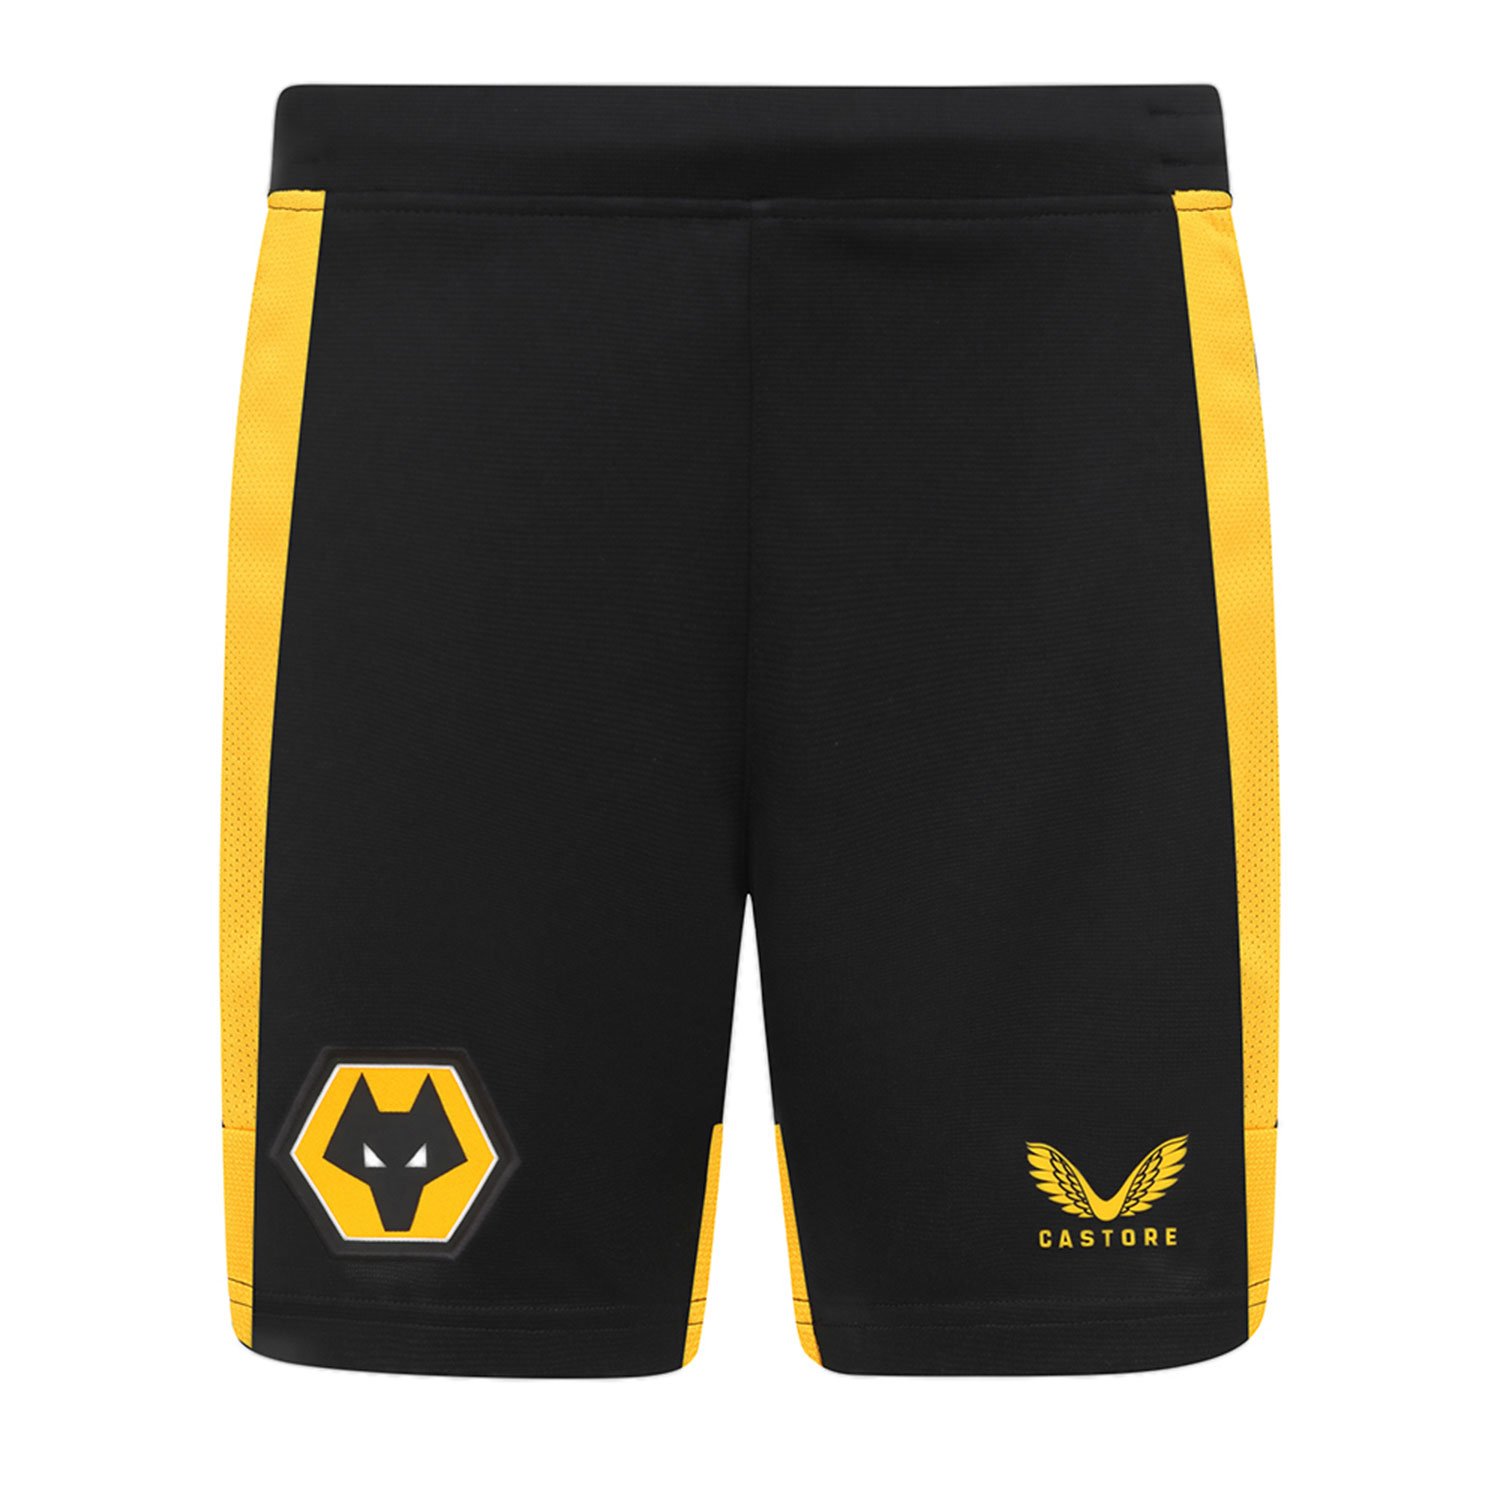 2022-23 Wolves Home Shorts - Adult
Be Part Of the Pack, with the 2022-23 Wolves Home shorts and show your pride on the street and in the stands.
Featuring detailed colour matching and dyeing to be true Wolves Gold and bring it back home to the club and fans.

Contrast side and hem panel to mimic the shirt
Drawstring fastening
Featuring the Castore logo in Wolves Gold
Woven coloured Wolves crest.
100% recycled polyester
